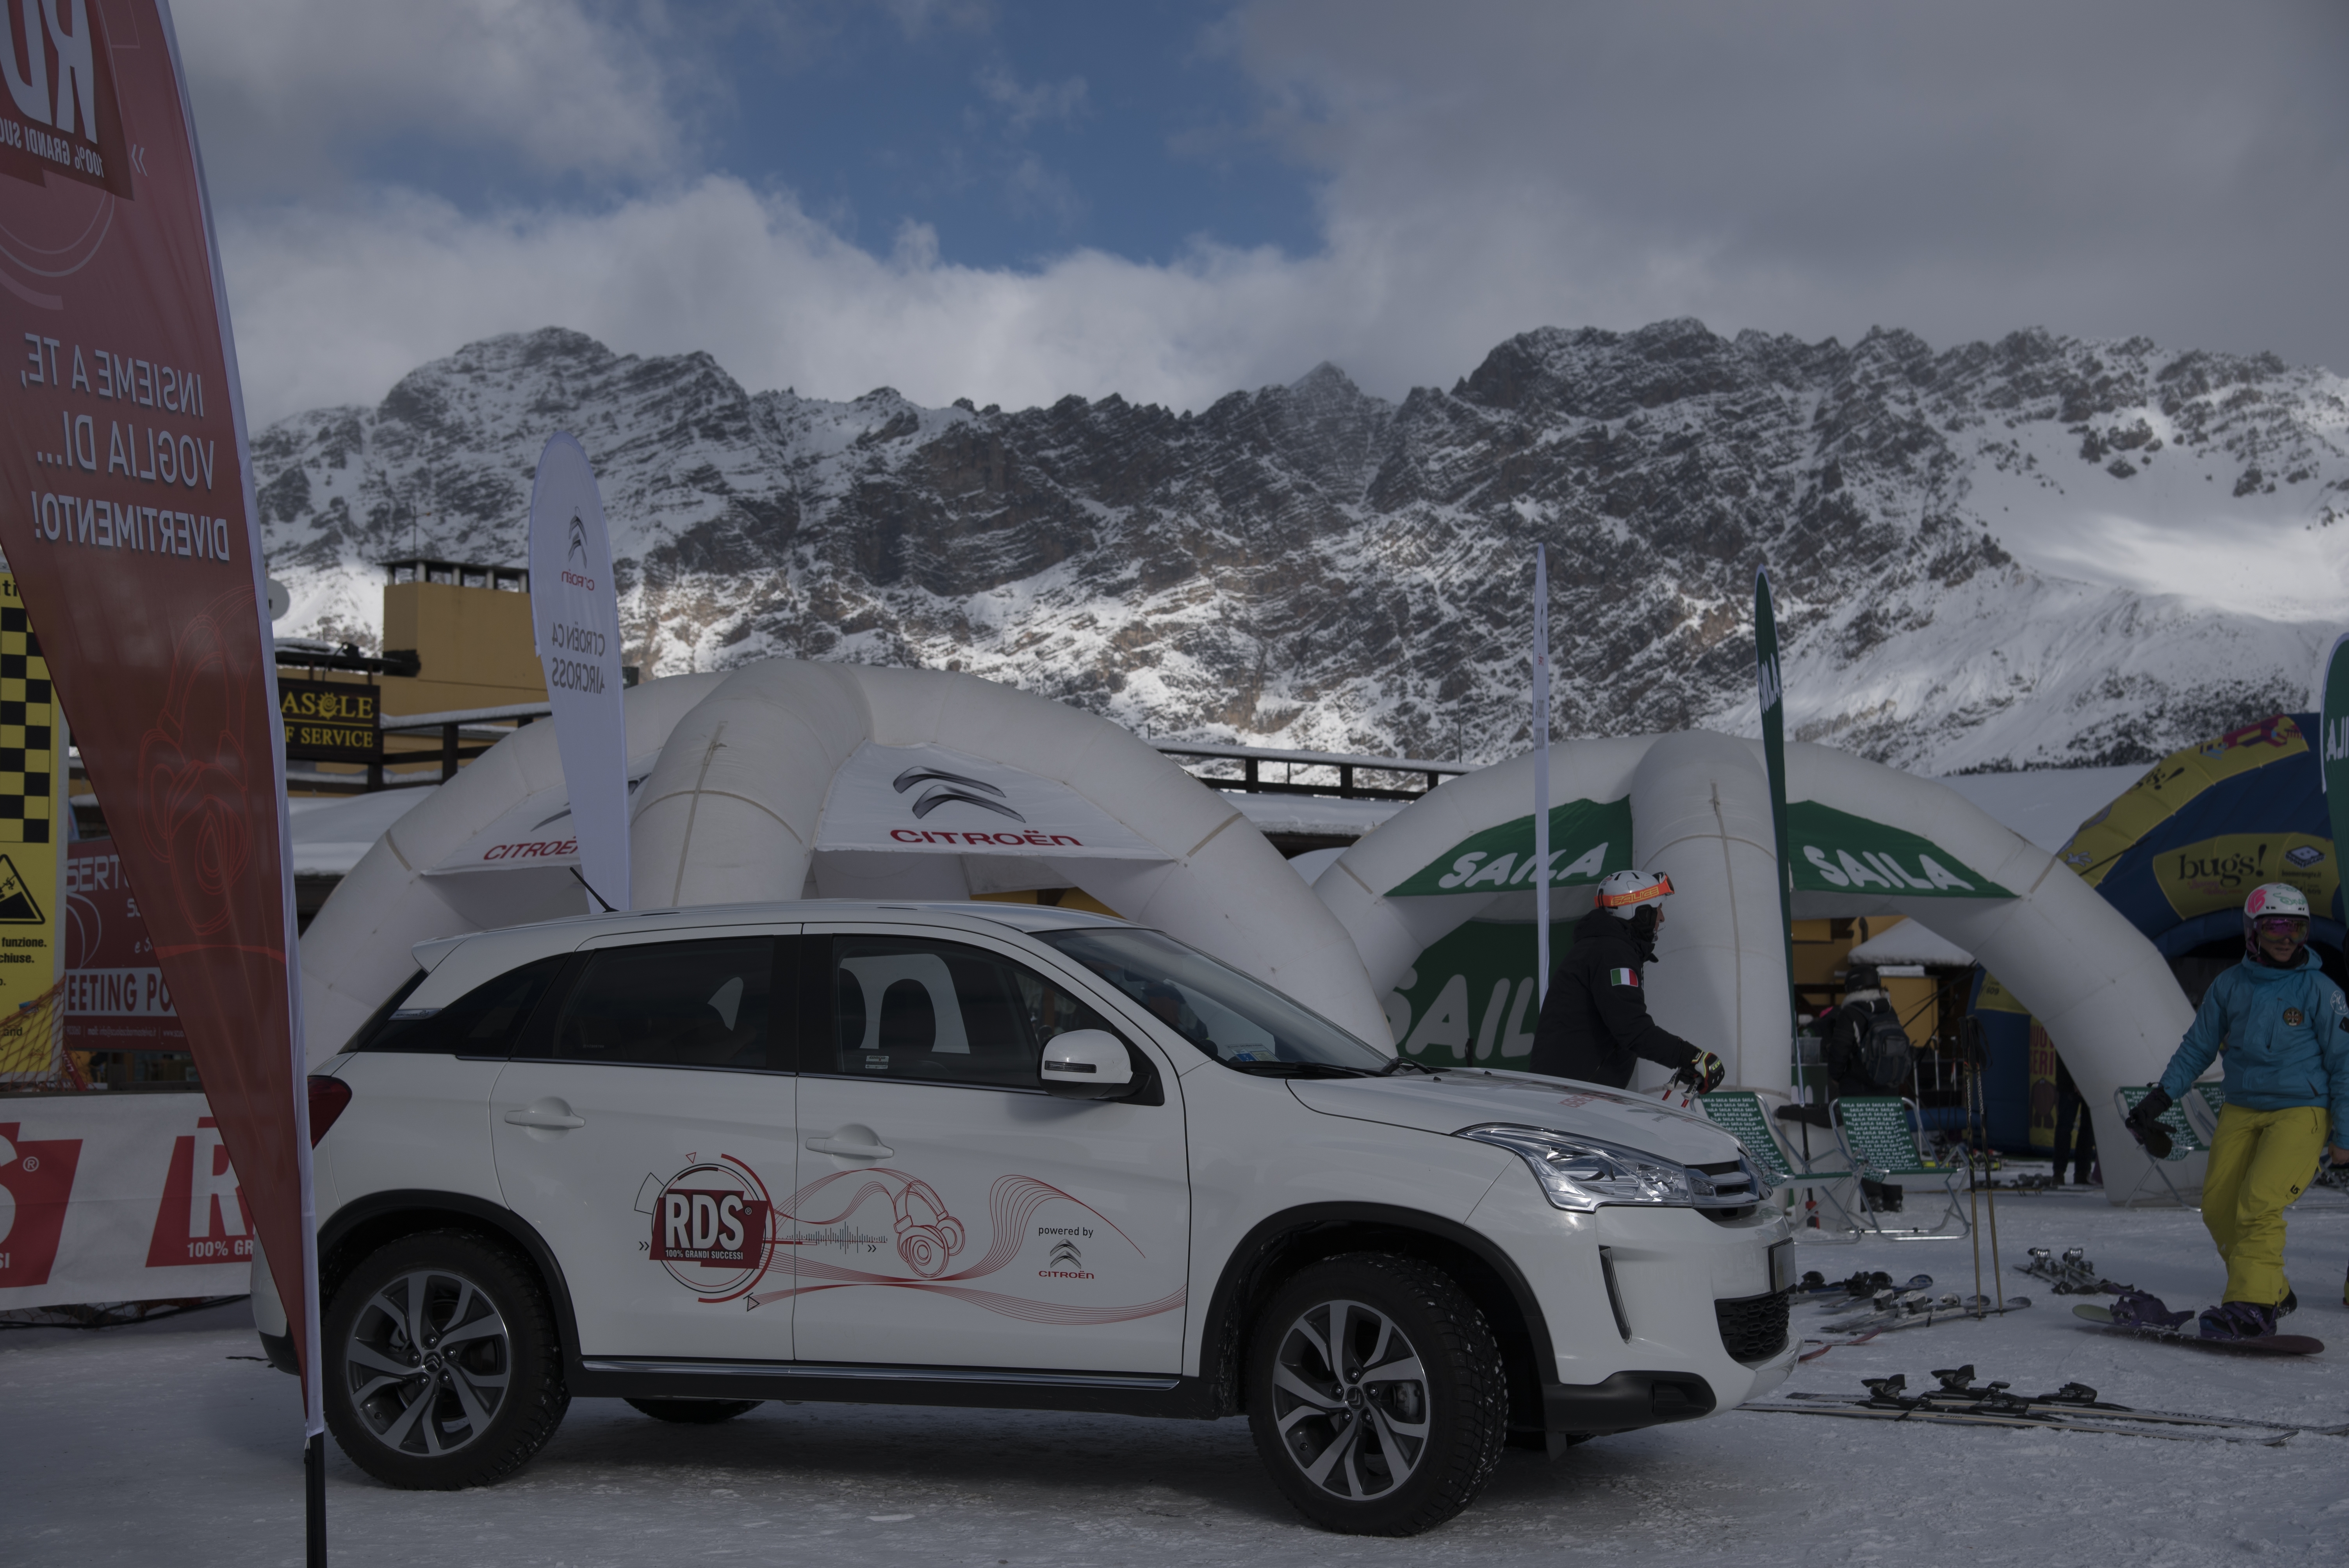 RDS Play on Tour: in montagna con Citroën C4 Aircross